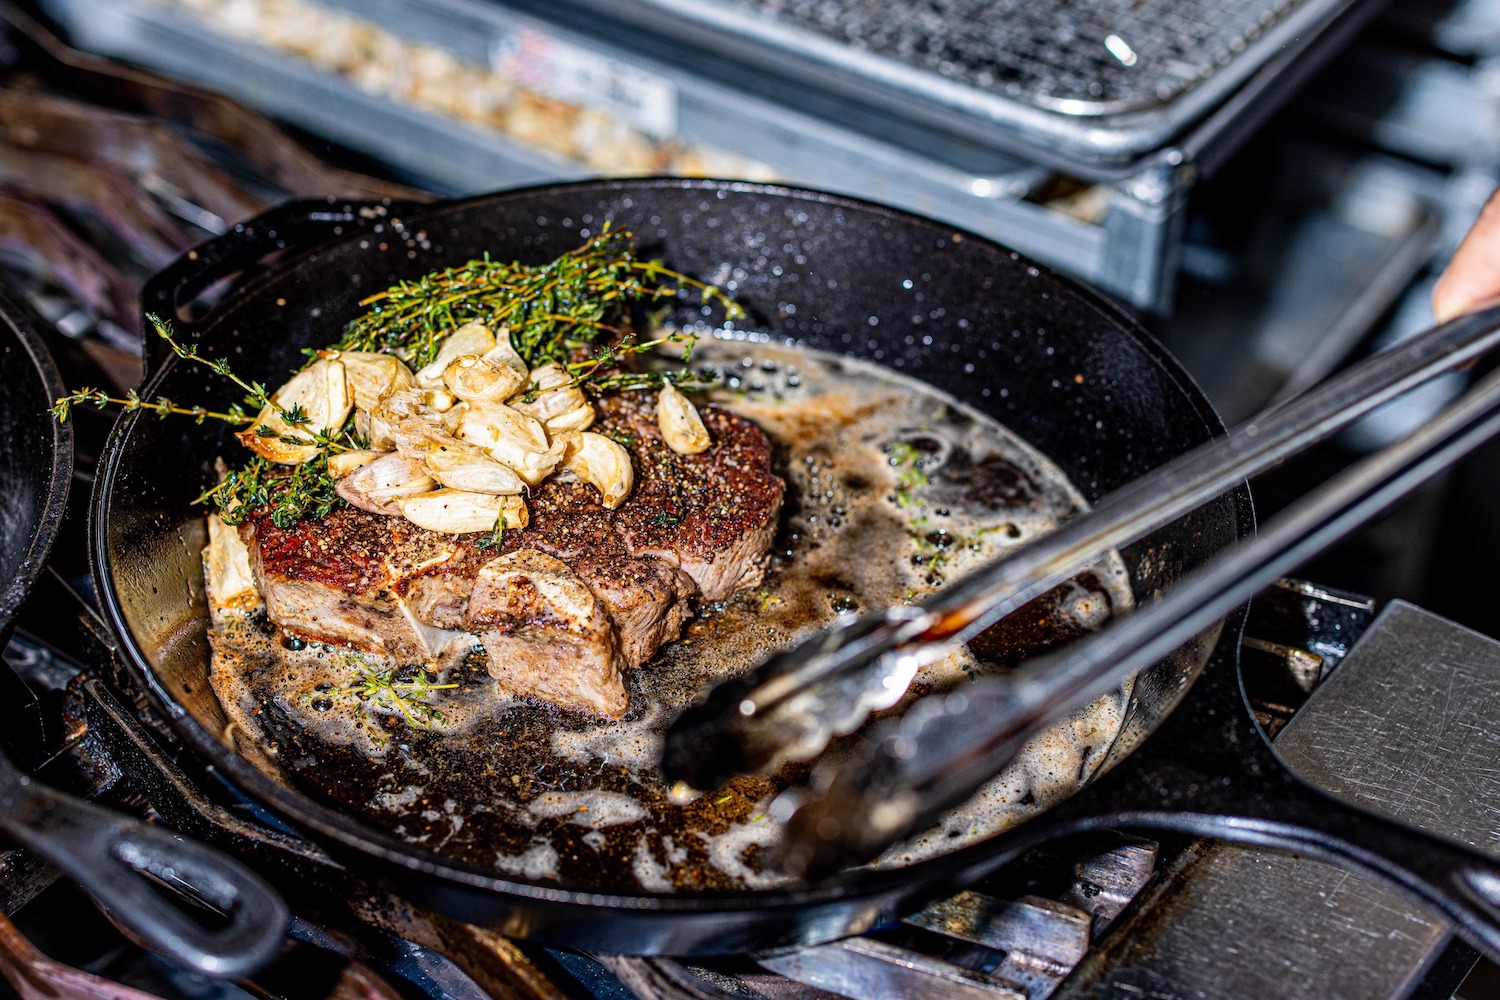 Steak being cooked in a pan.